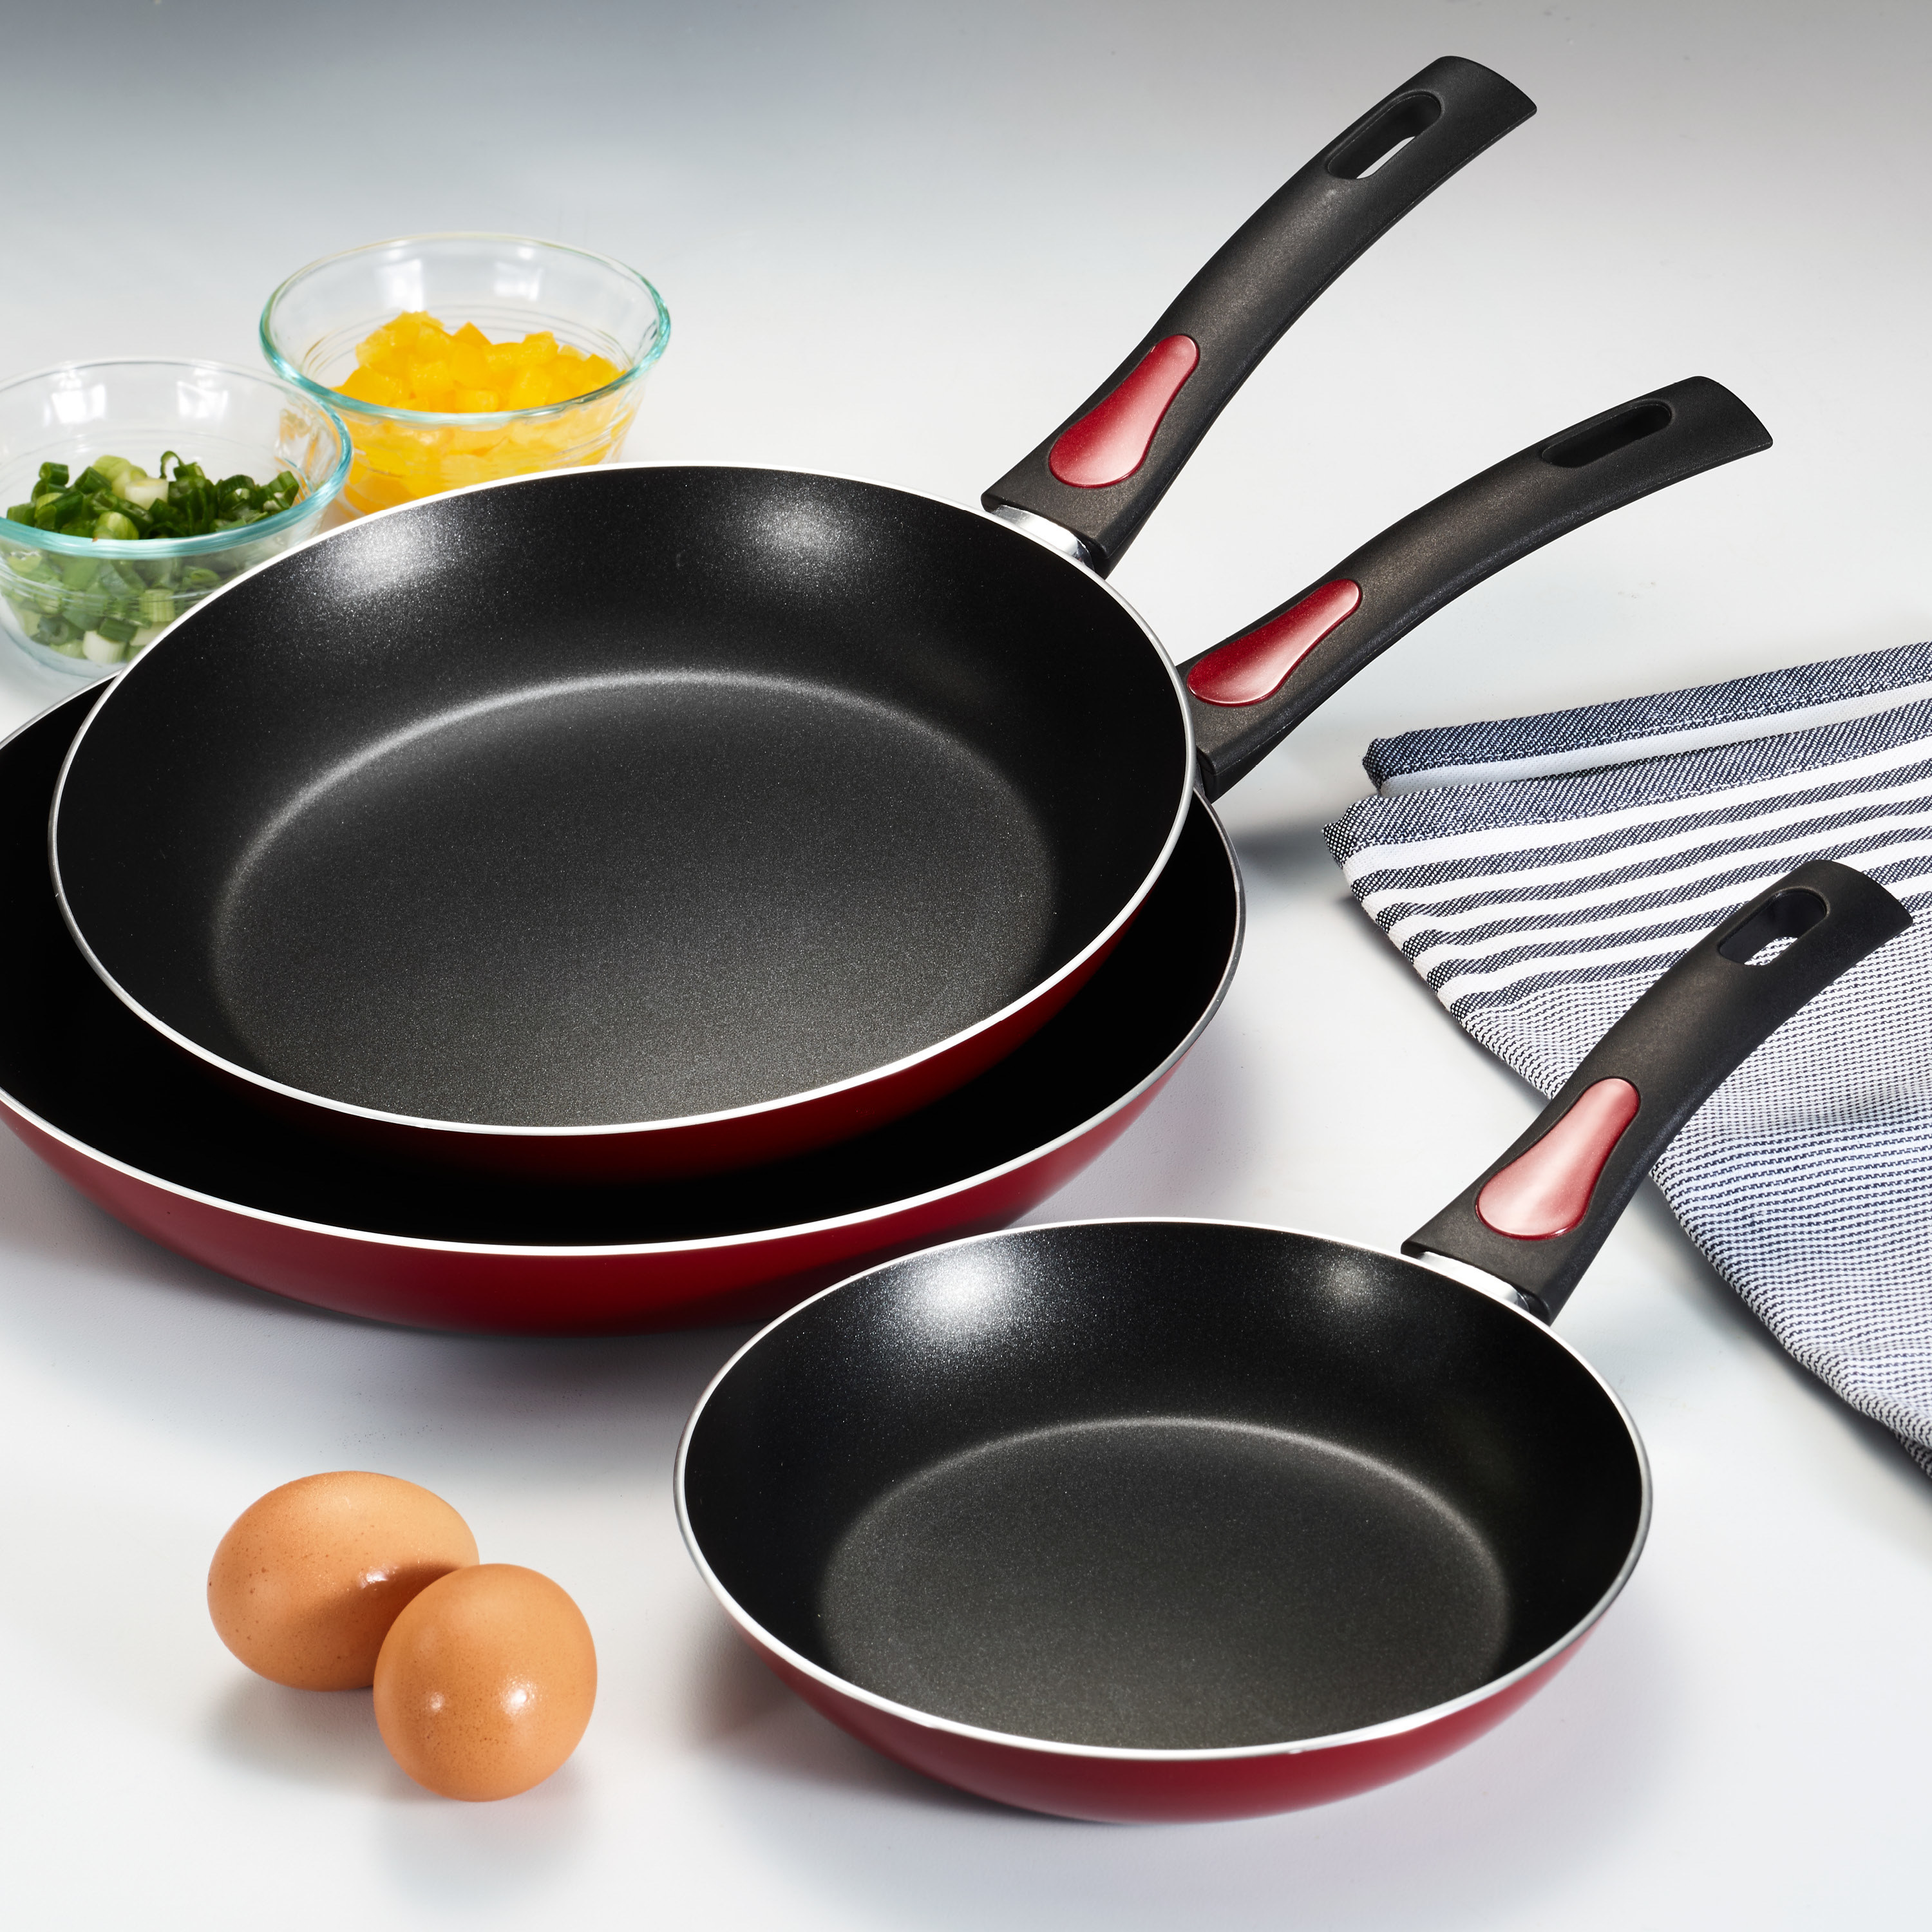 Three red and black fry pans in varying sizes